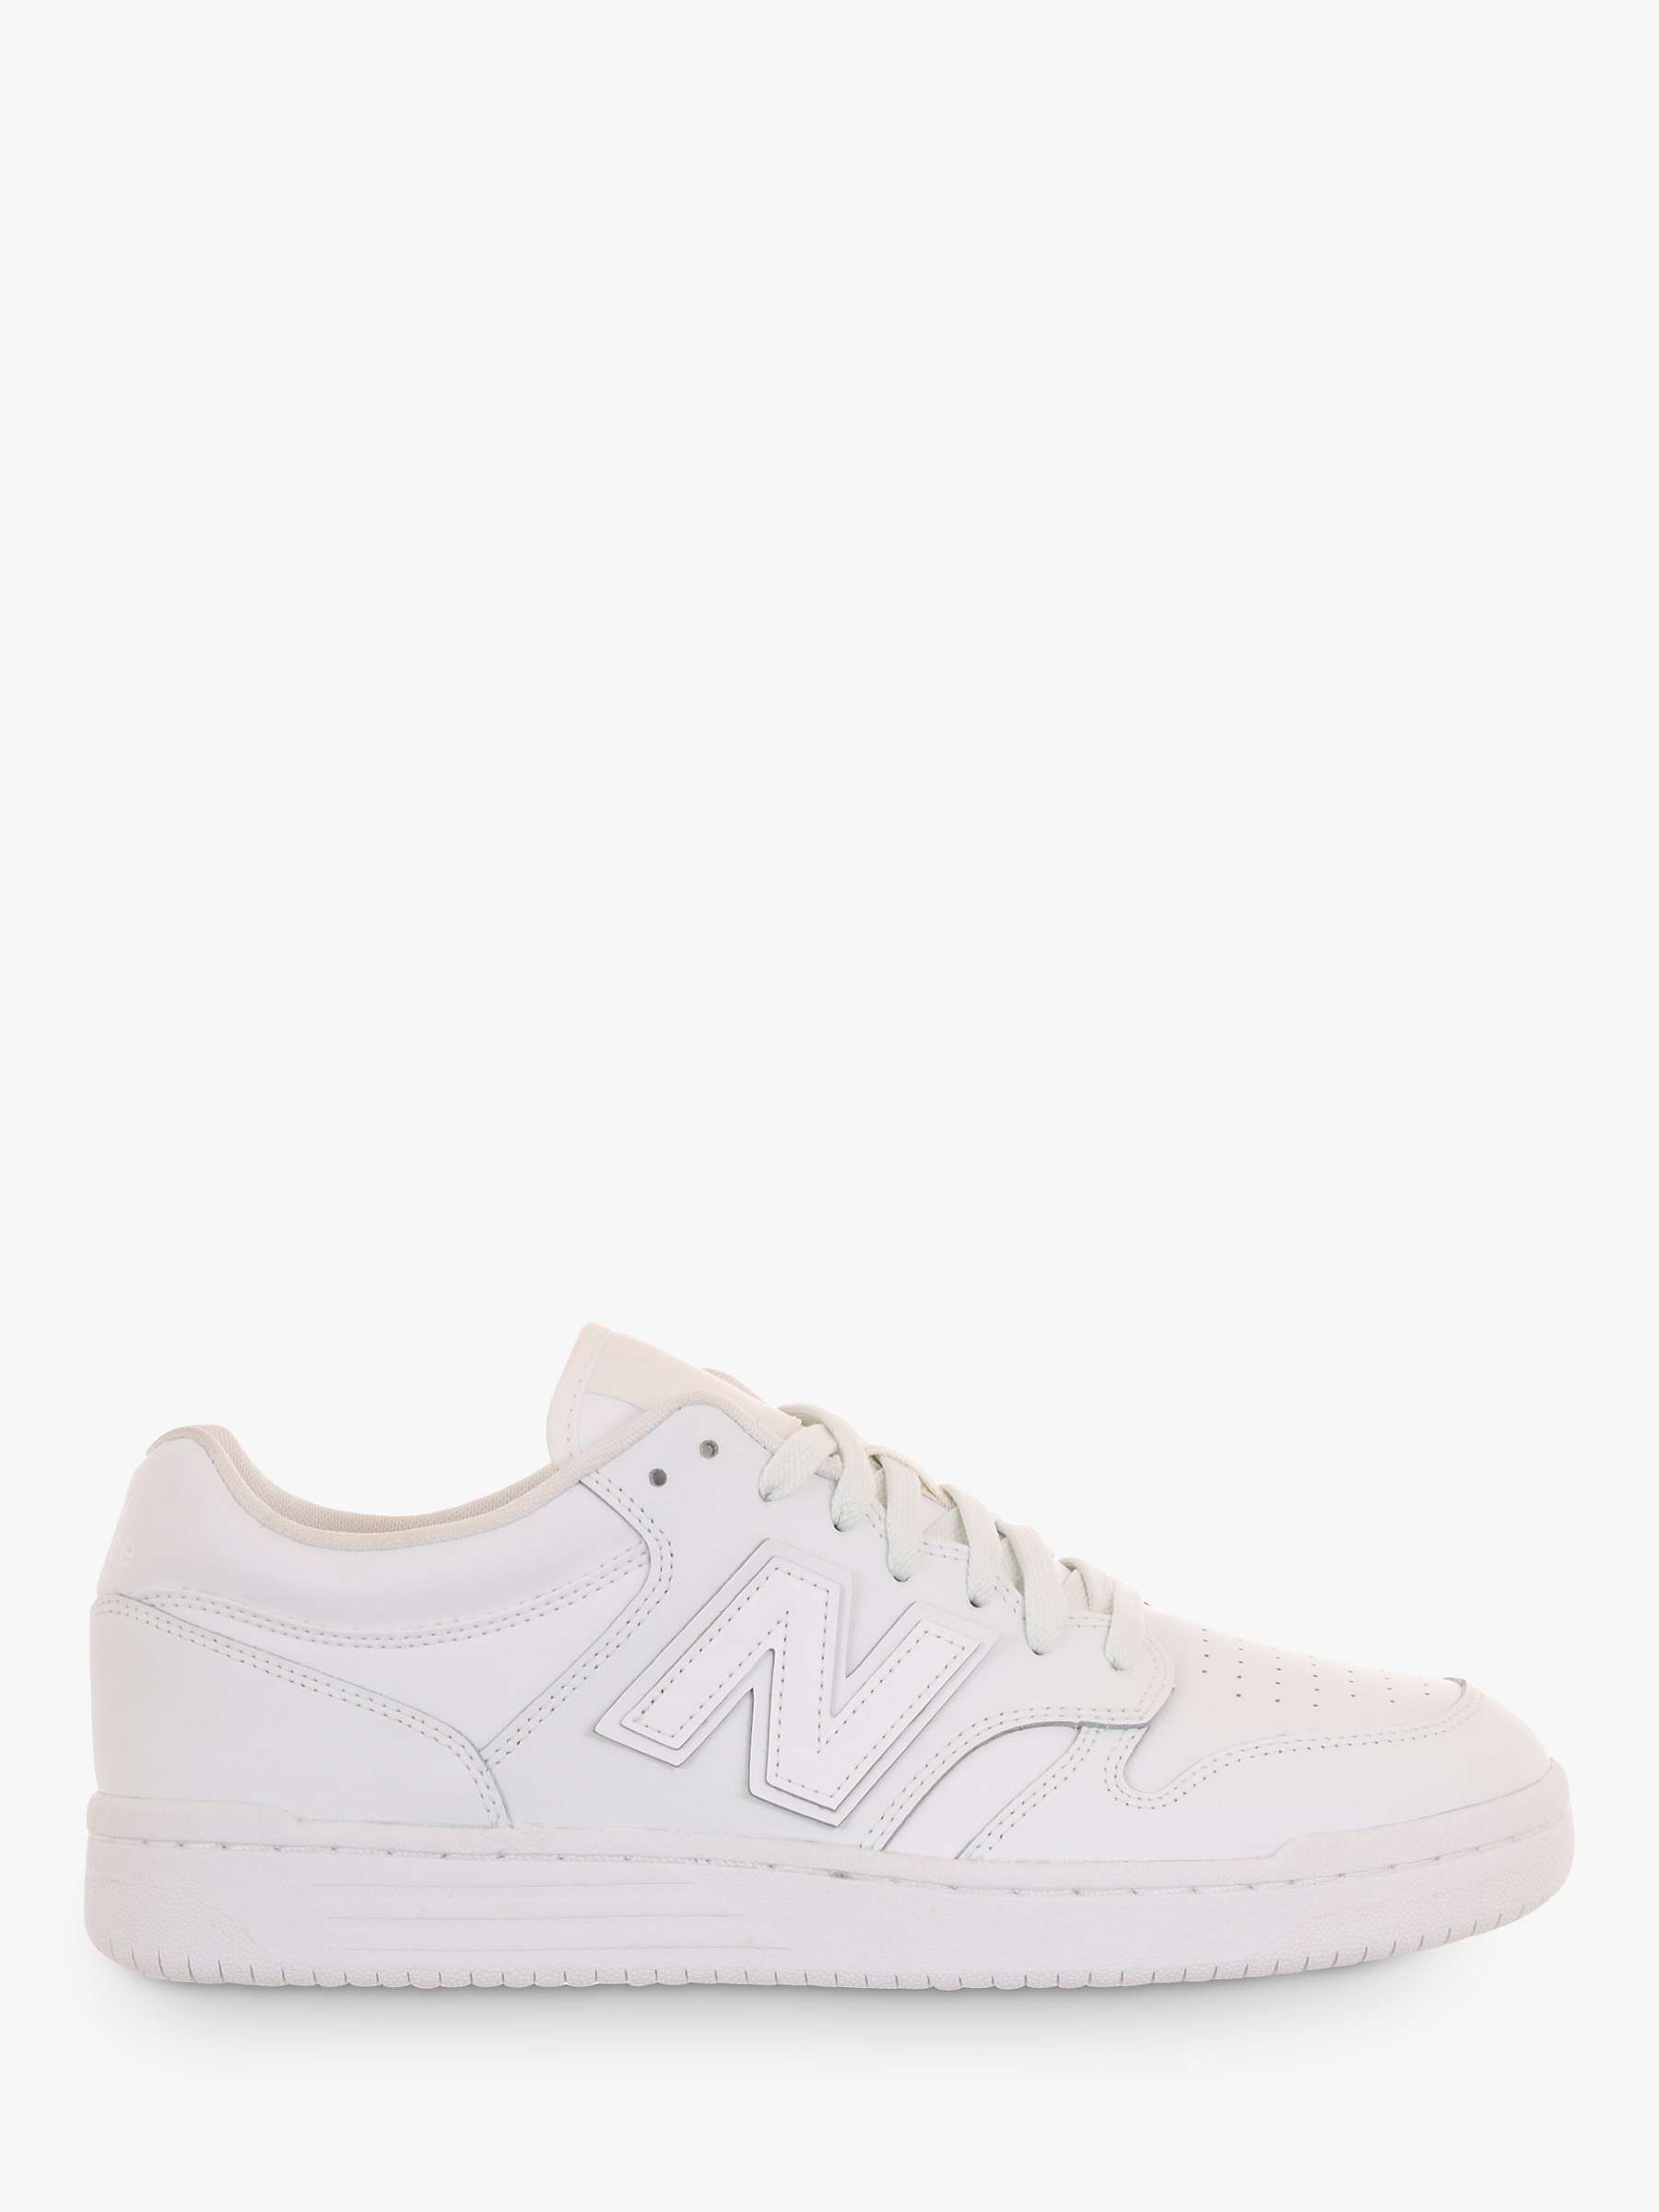 Buy New Balance BB480 Leather Lace Up Trainers, White Online at johnlewis.com